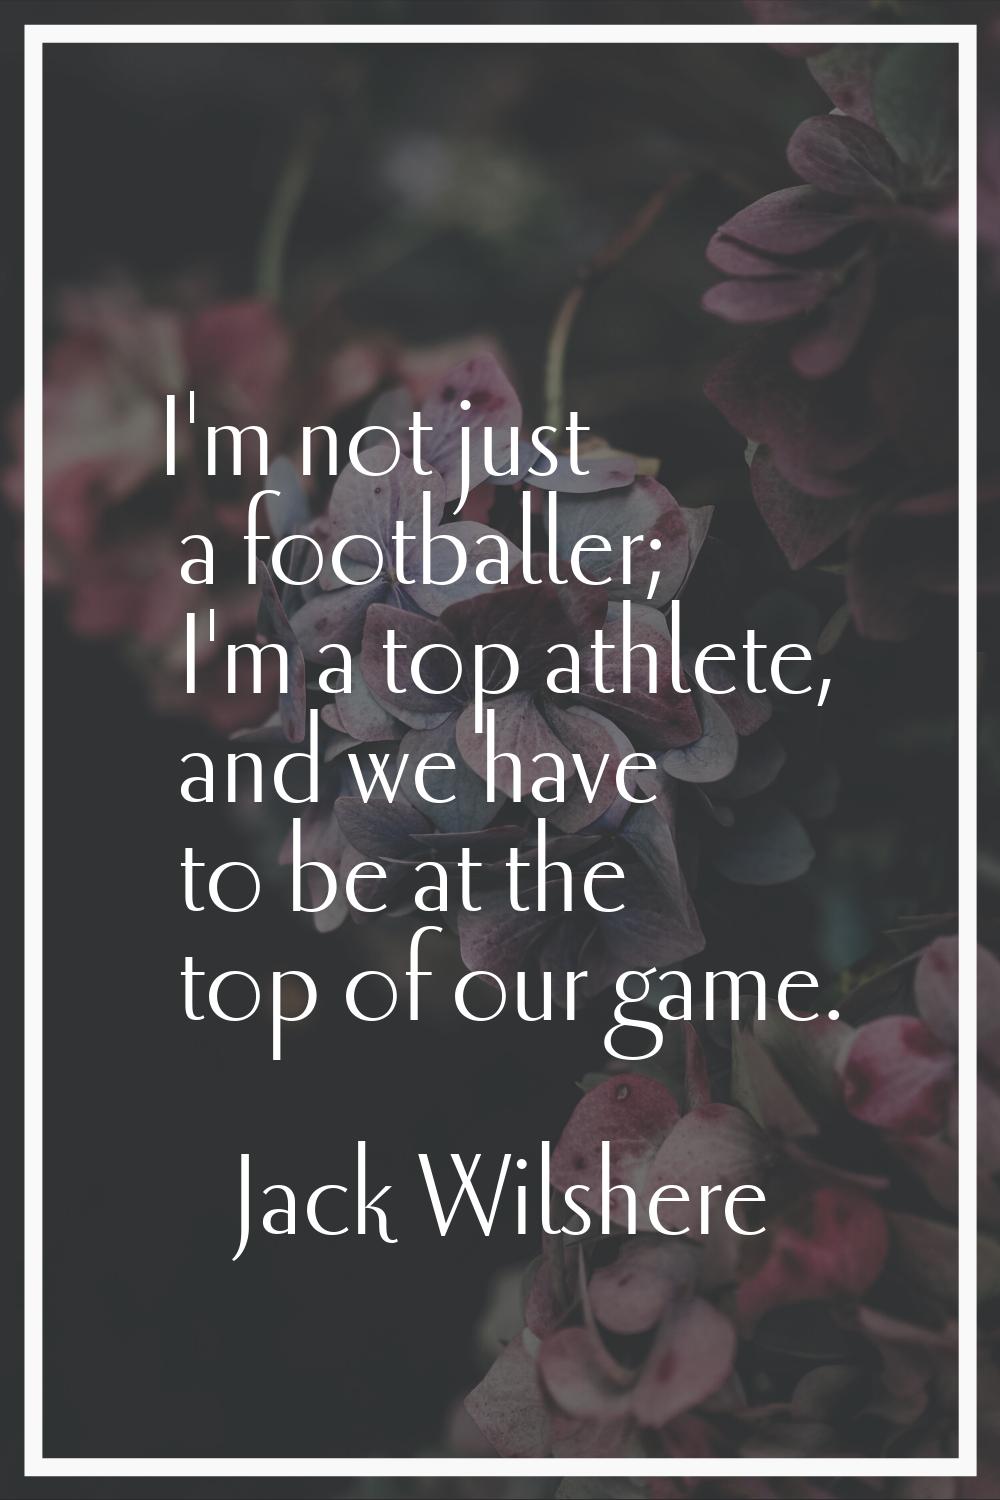 I'm not just a footballer; I'm a top athlete, and we have to be at the top of our game.